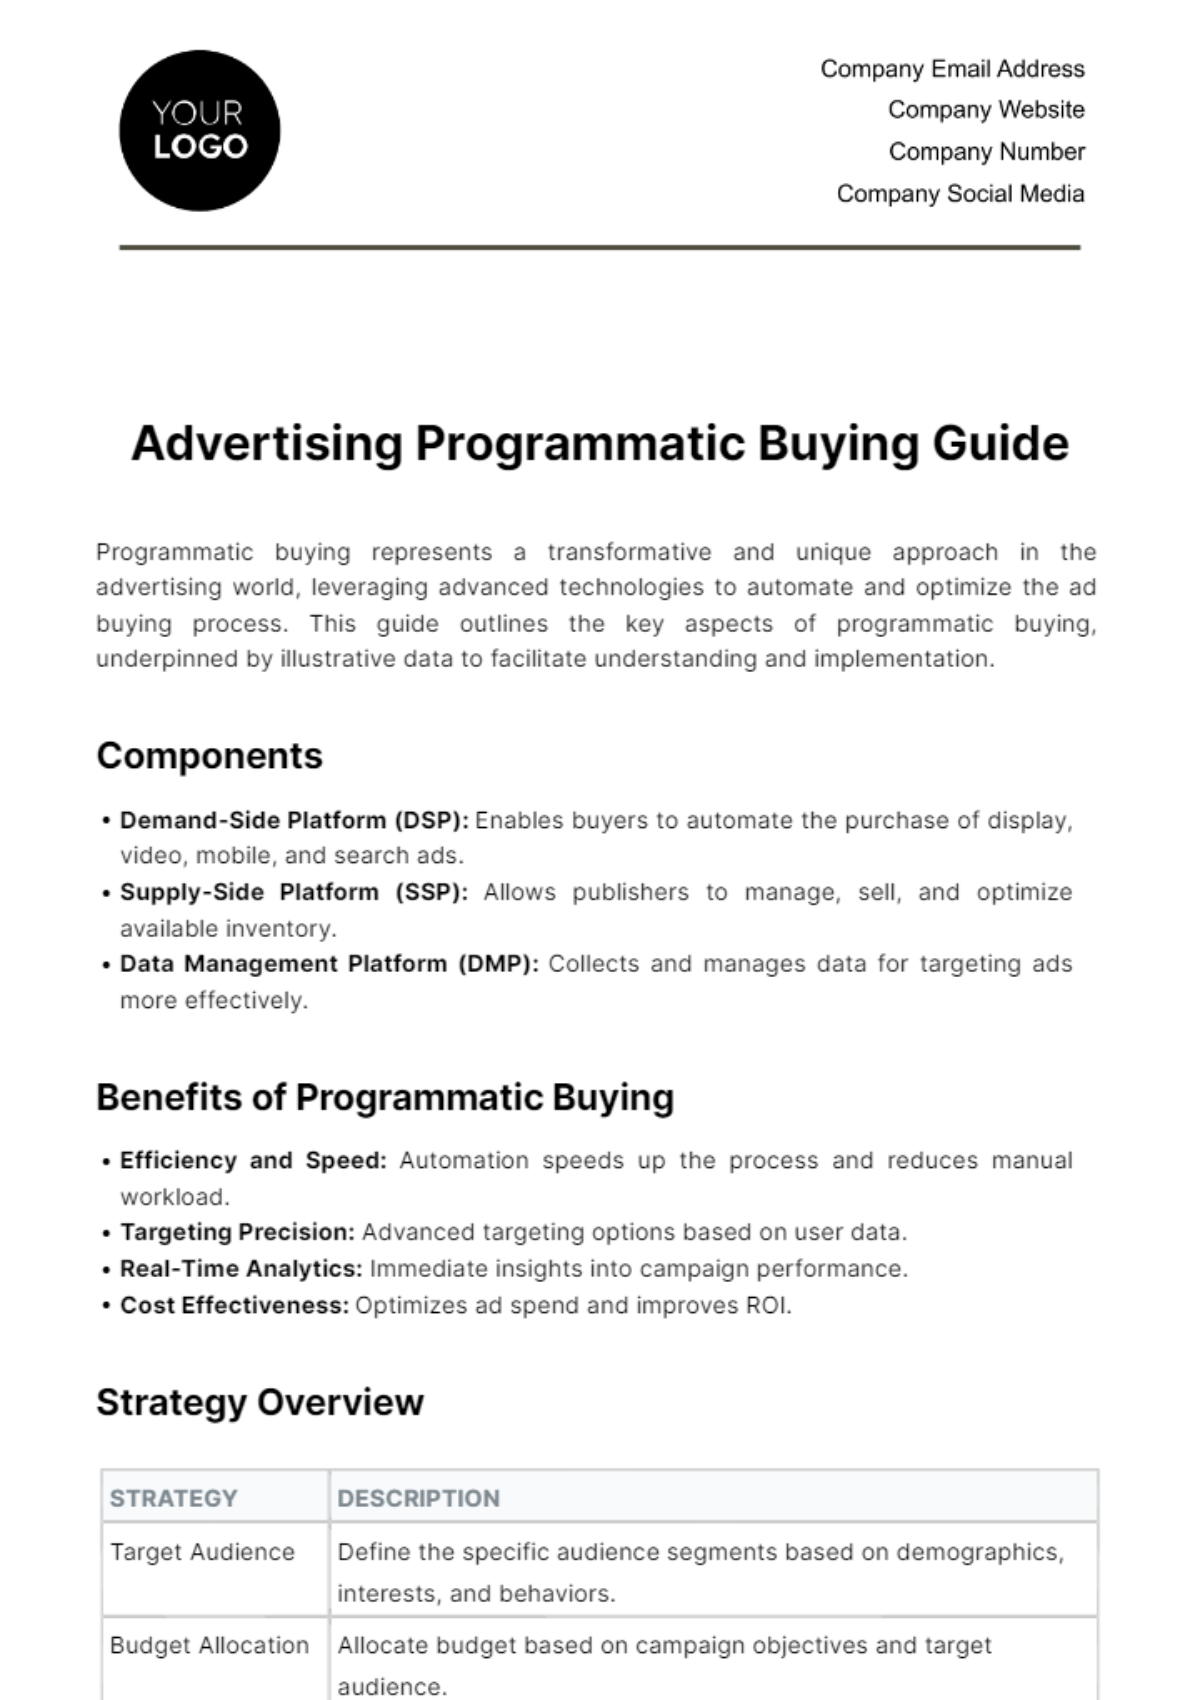 Free Advertising Programmatic Buying Guide Template